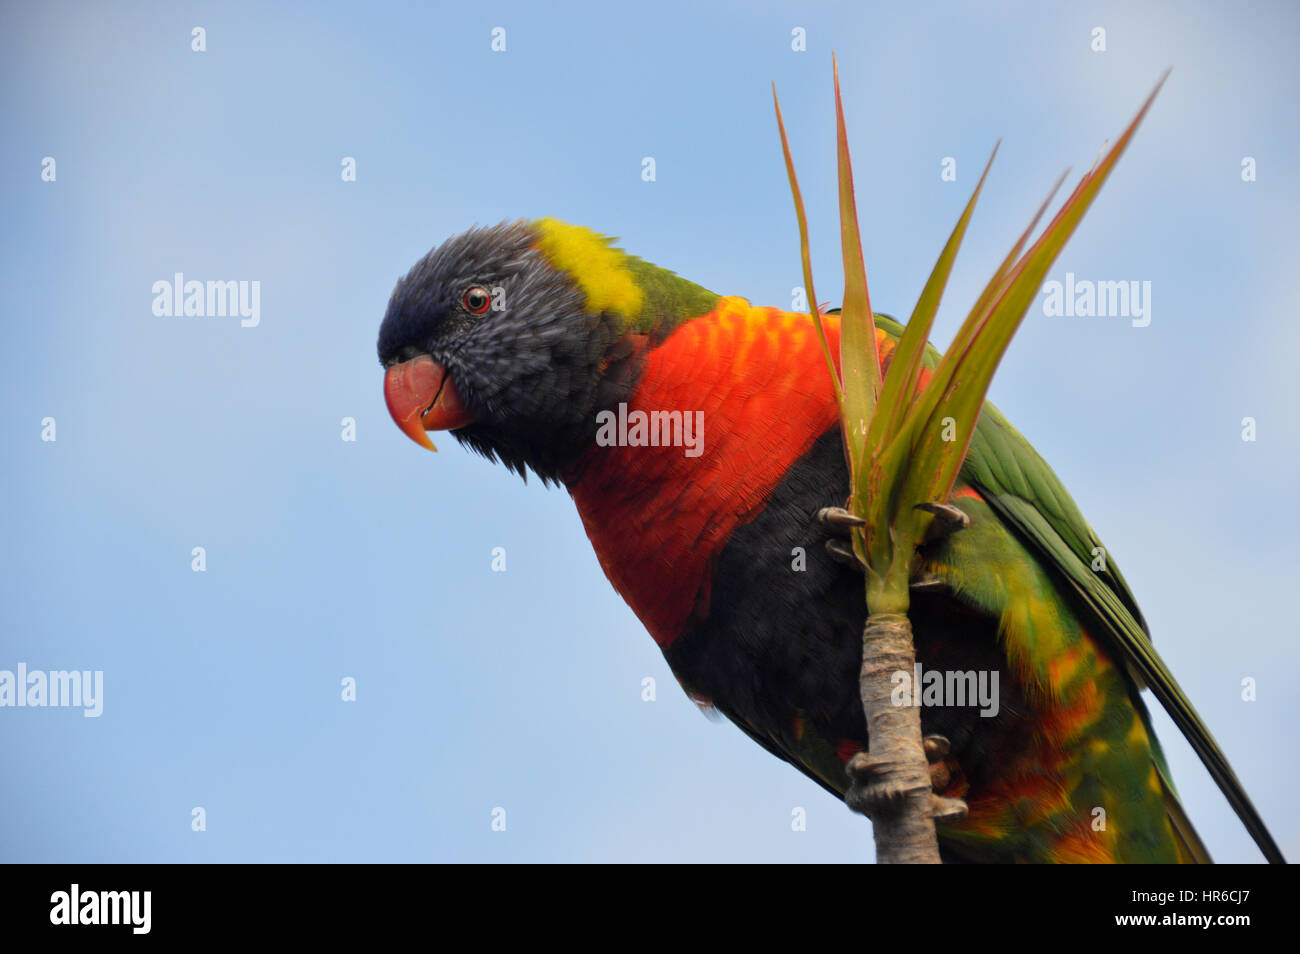 A Close up Lone Rainbow Lorikeet (Trichoglossus Moluccanus) in a Tree at Symbio Wildlife Park, Helensburgh,Sydney,New South Wales,Australia, Stock Photo